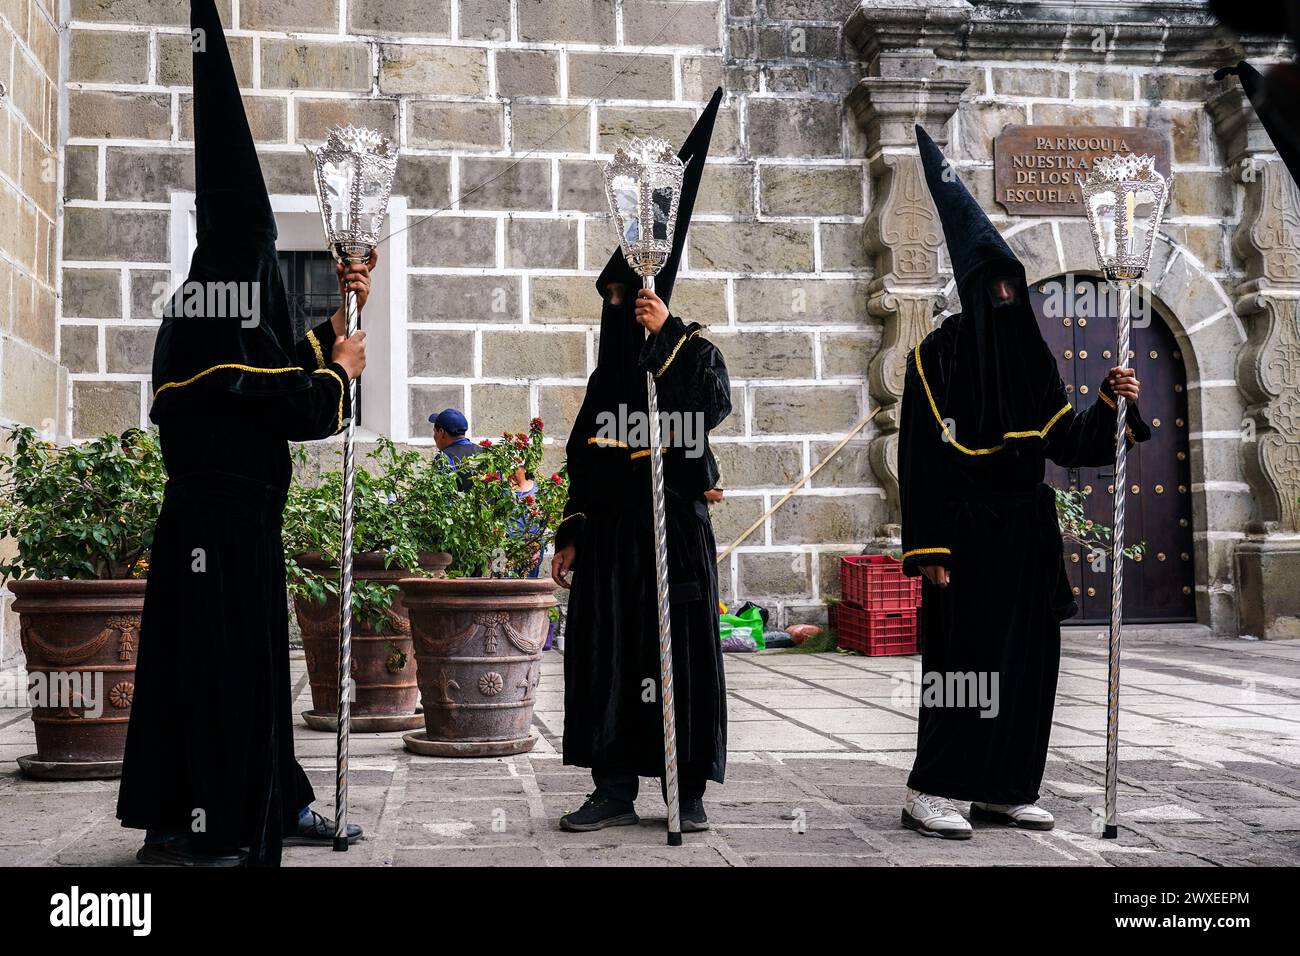 Antigua, Guatemala. 29th Mar, 2024. A confraternity of penitents, wearing capirote hats, wait outside the Escuela de Cristo church for the start of the Senor Sepultado Good Friday procession during Semana Santa, March 29, 2024 in Antigua, Guatemala. The opulent procession is one of the largest in the world involving thousands of devotees and lasting 12-hours. Credit: Richard Ellis/Richard Ellis/Alamy Live News Stock Photo